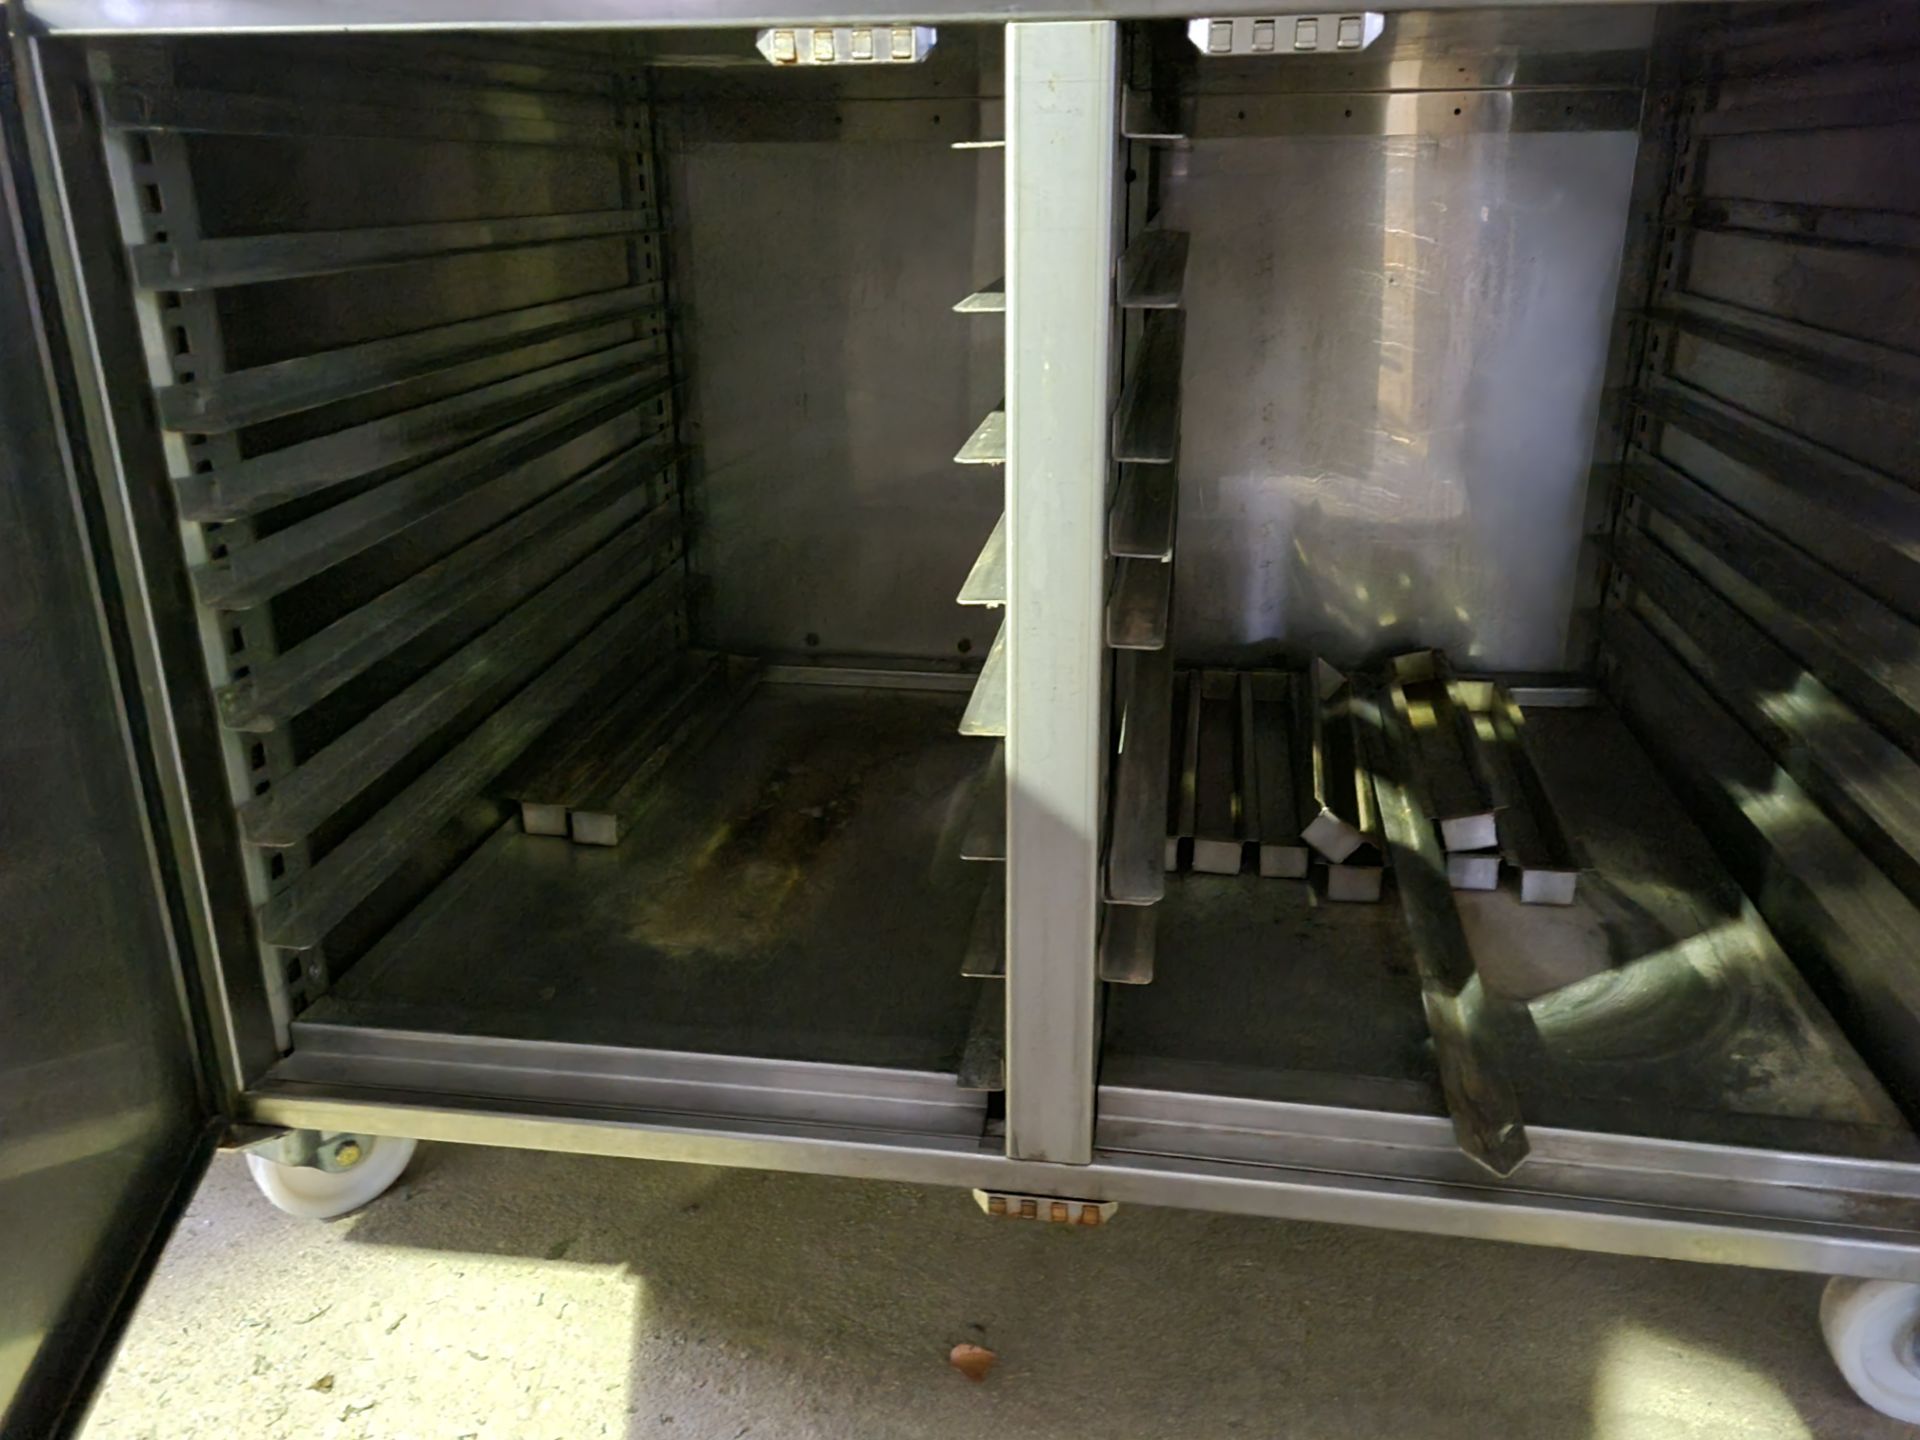 2 Deck Electric Oven with Twin cooling cabinets below with 8 x rack shelves, 1400 x 1600 x 1850 - Bild 7 aus 8